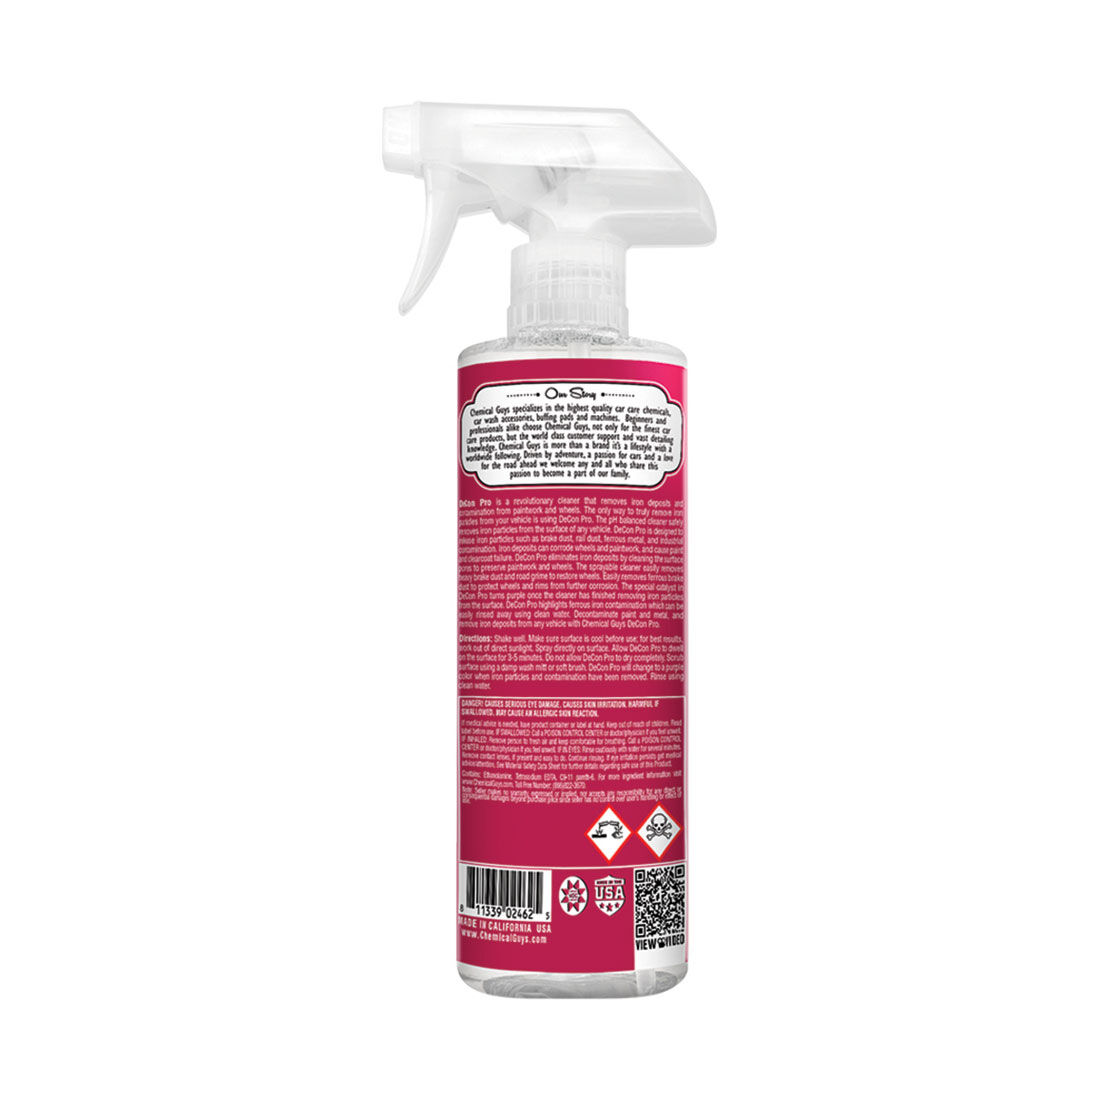 Chemical Guys Decon Pro Iron Remover & Wheel Cleaner 473mL, , scaau_hi-res